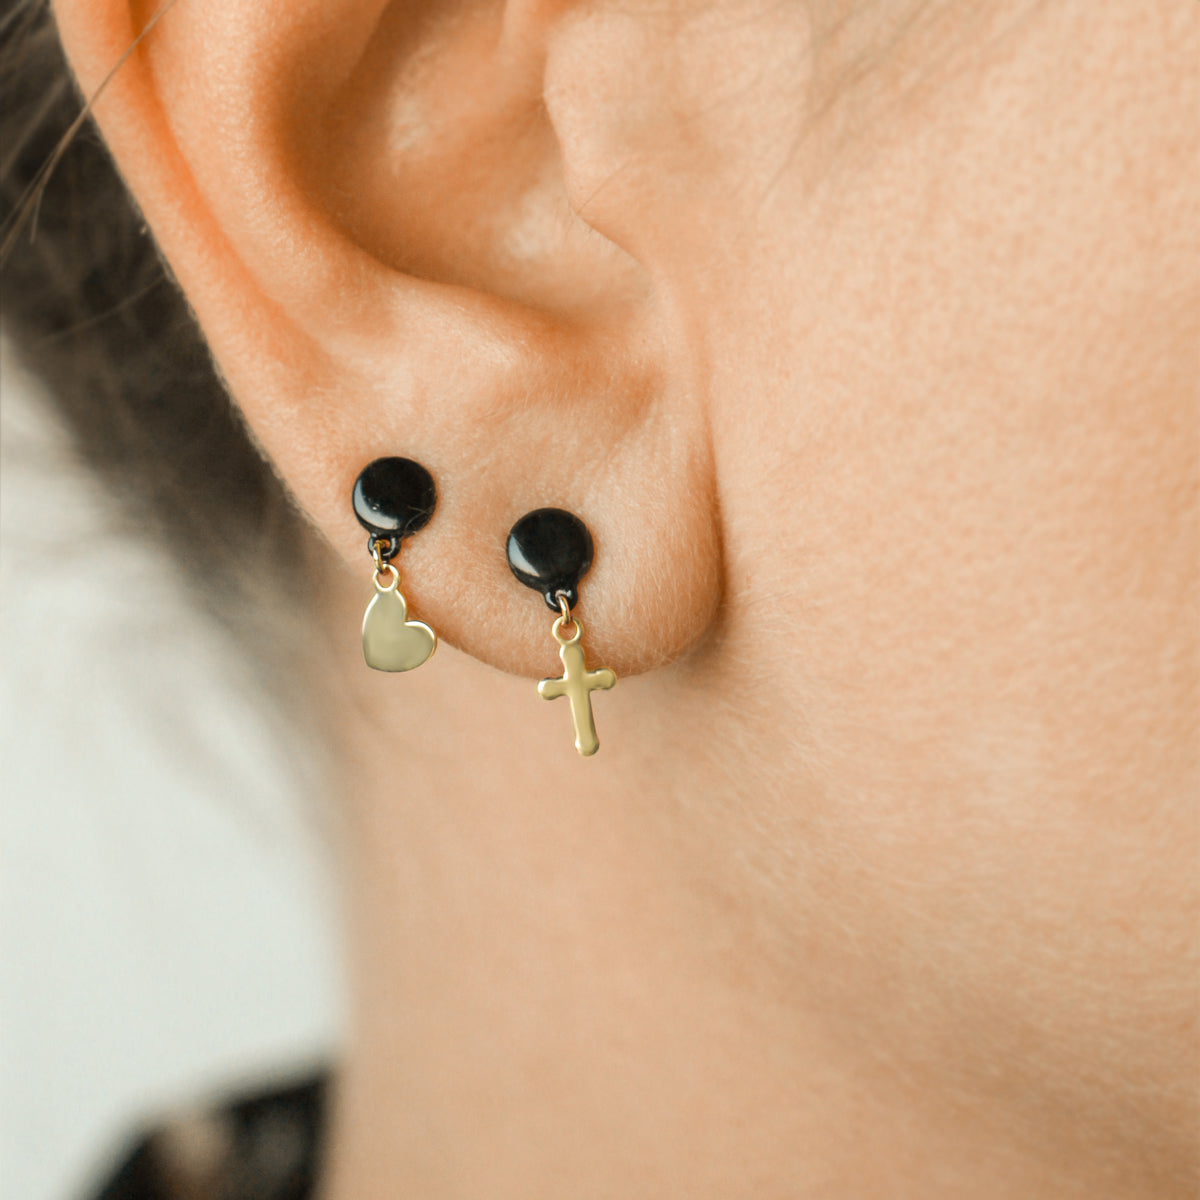 Earrings - Single earring with Cross and painted button - ORO18KT - 4 | Rue des Mille